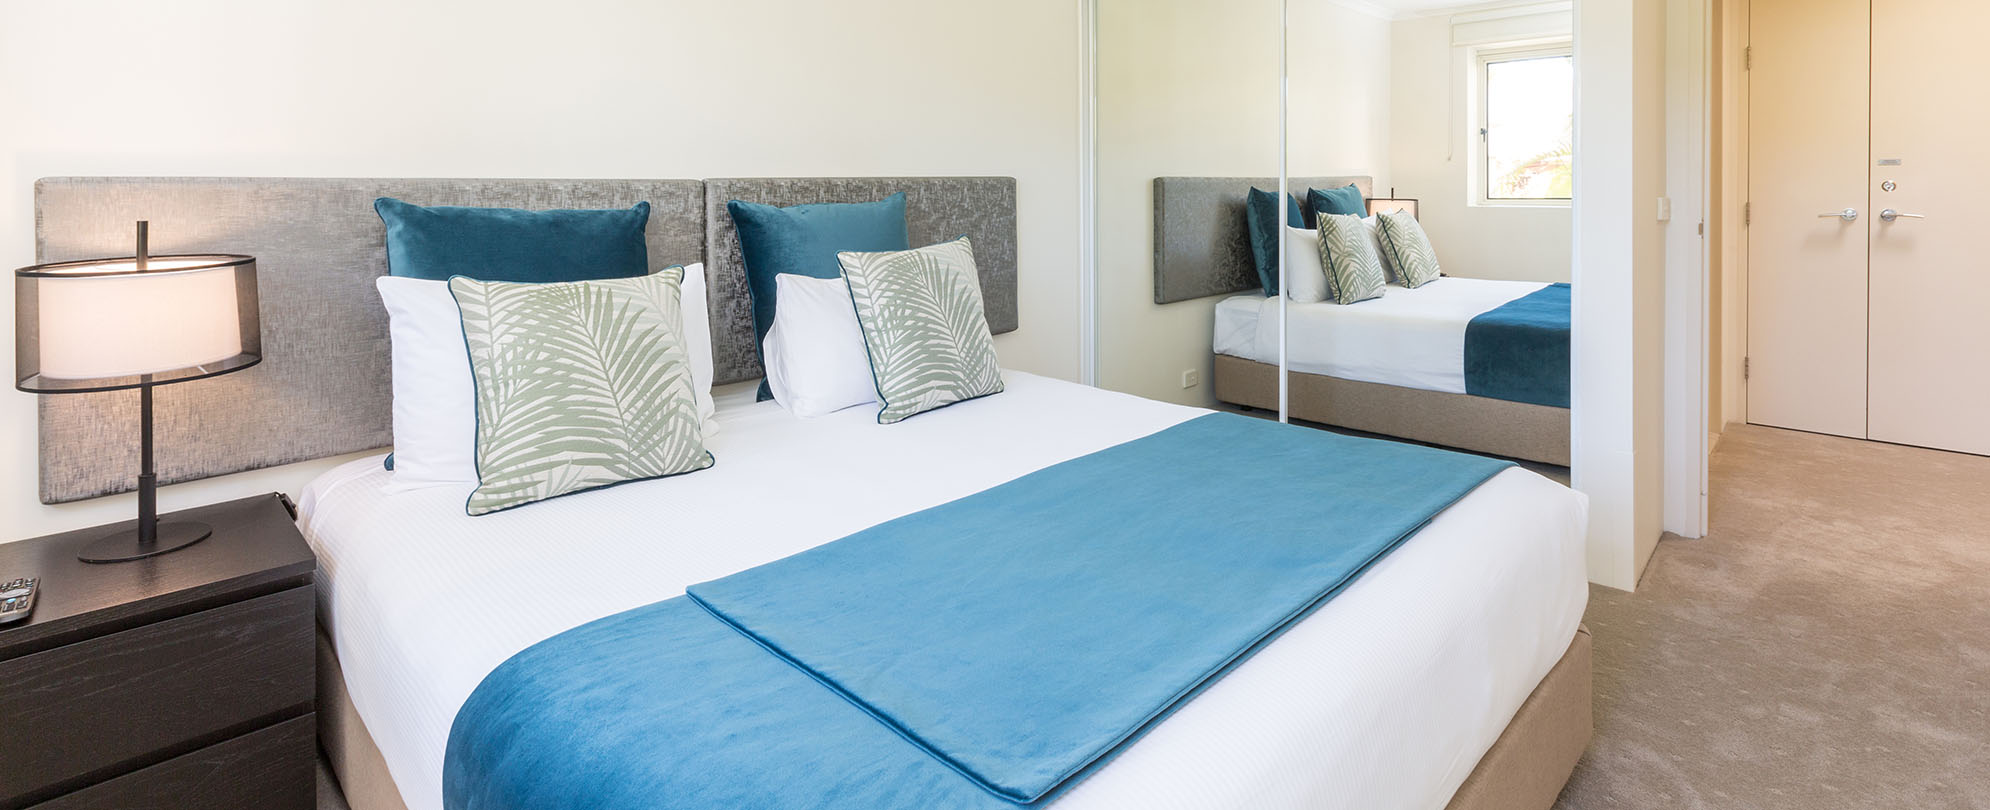 A king-sized bed in a 2-bedroom presidential reserve suite at Club Wyndham Shoal Bay.